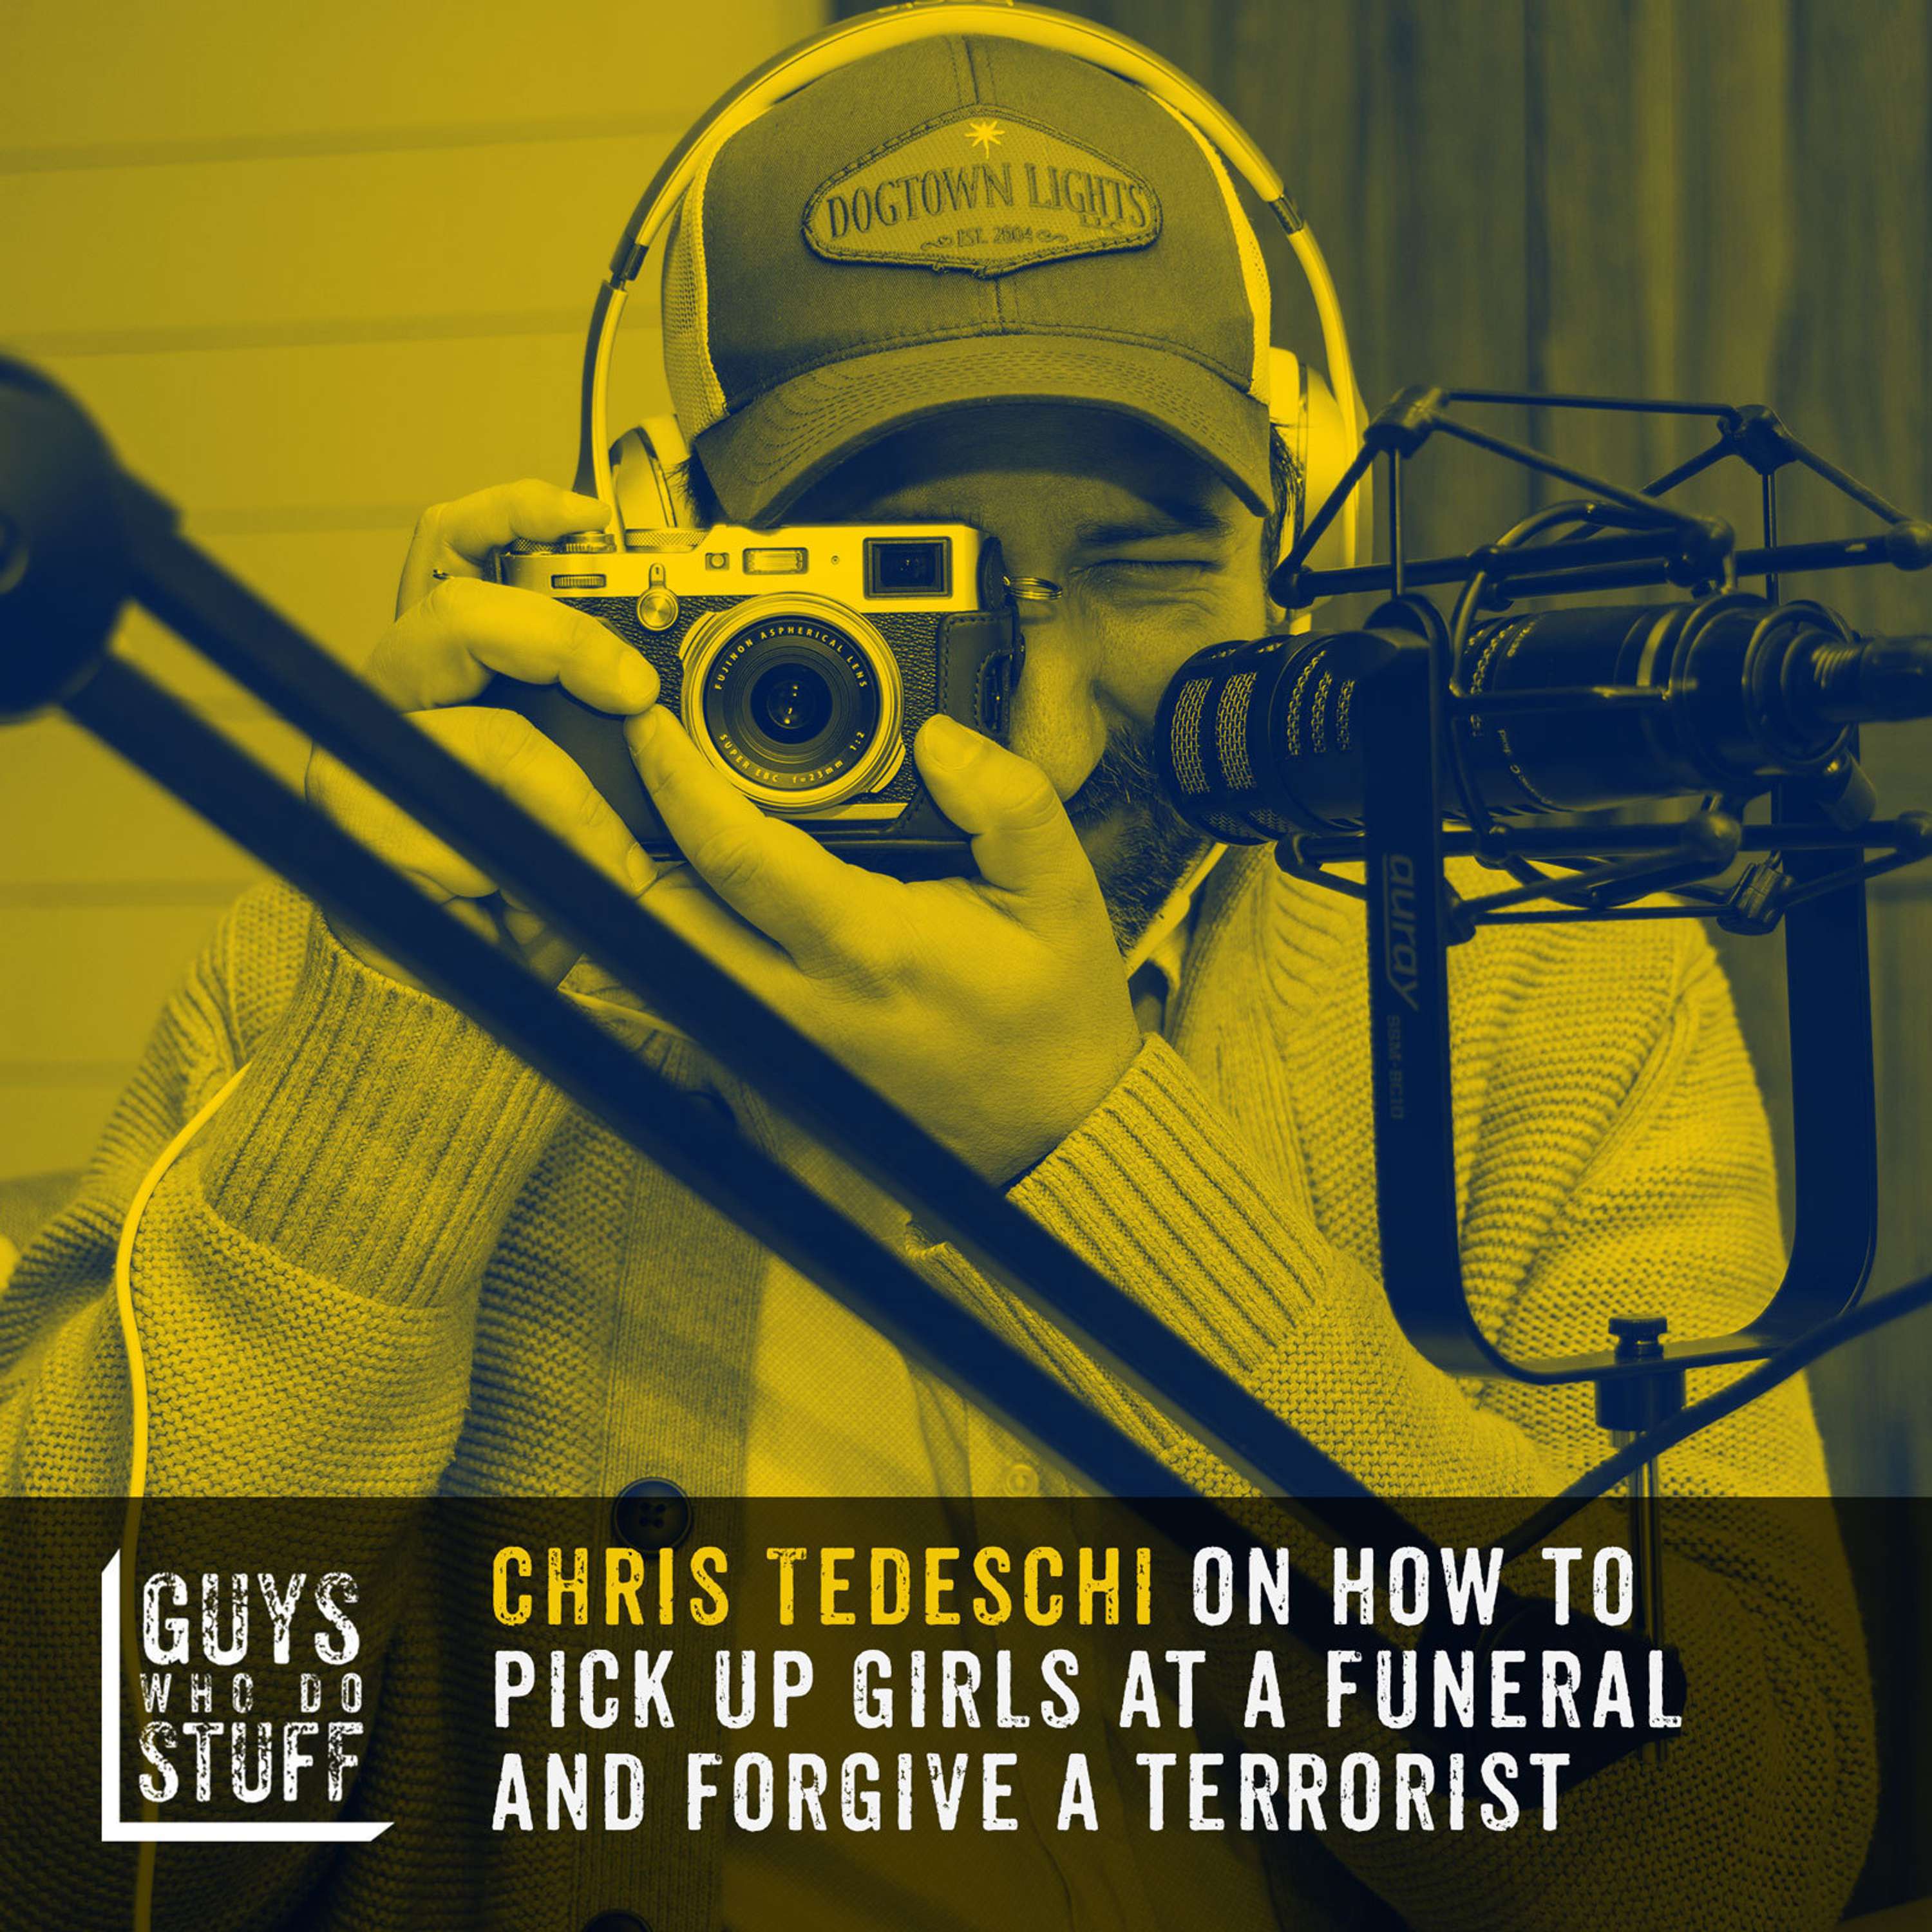 Chris Tedeschi on how to pick up girls at a funeral and forgive a terrorist